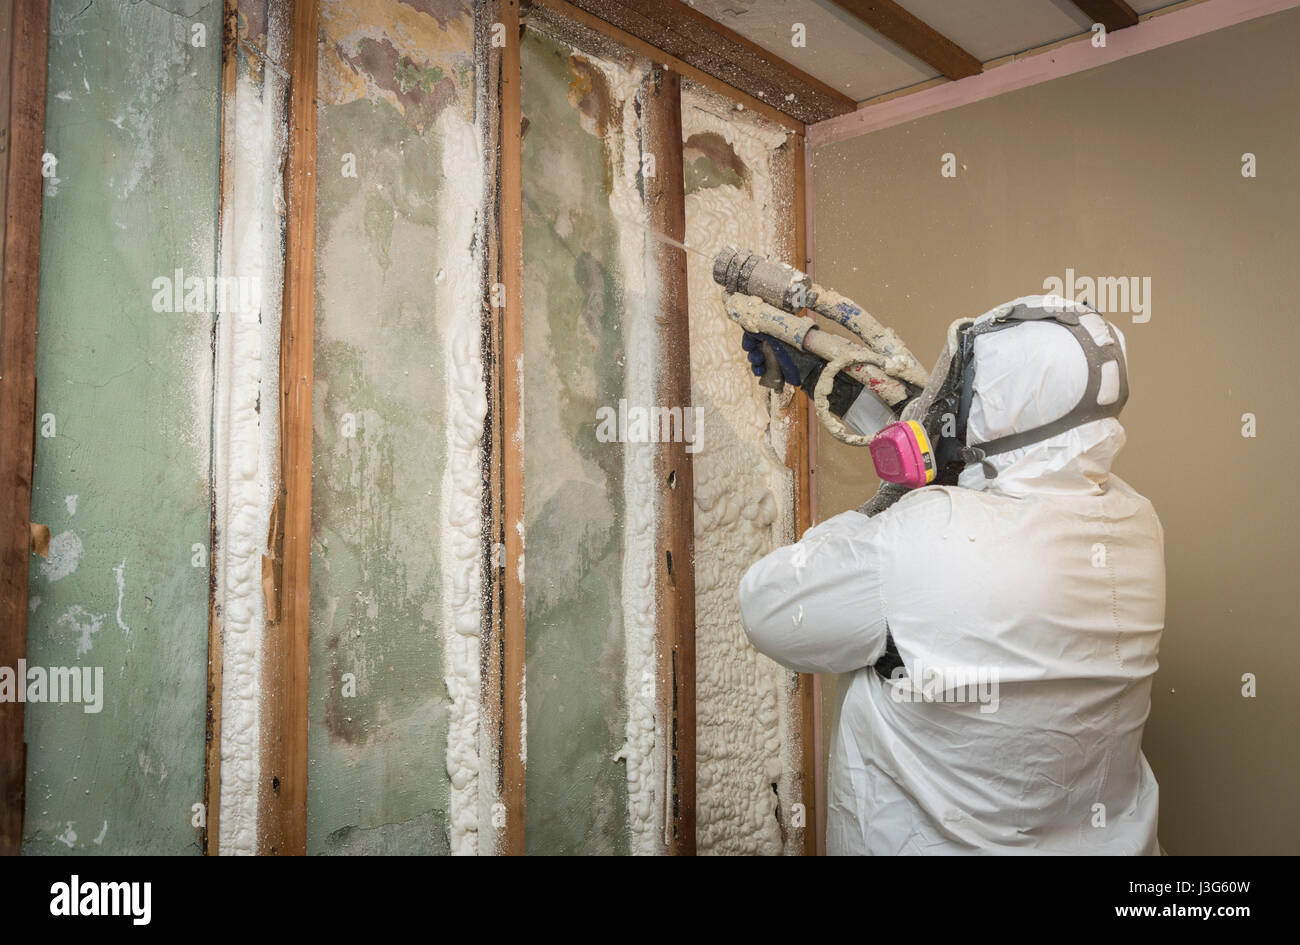 Workers Spraying Open Cell Foam Insulation On Interior Walls